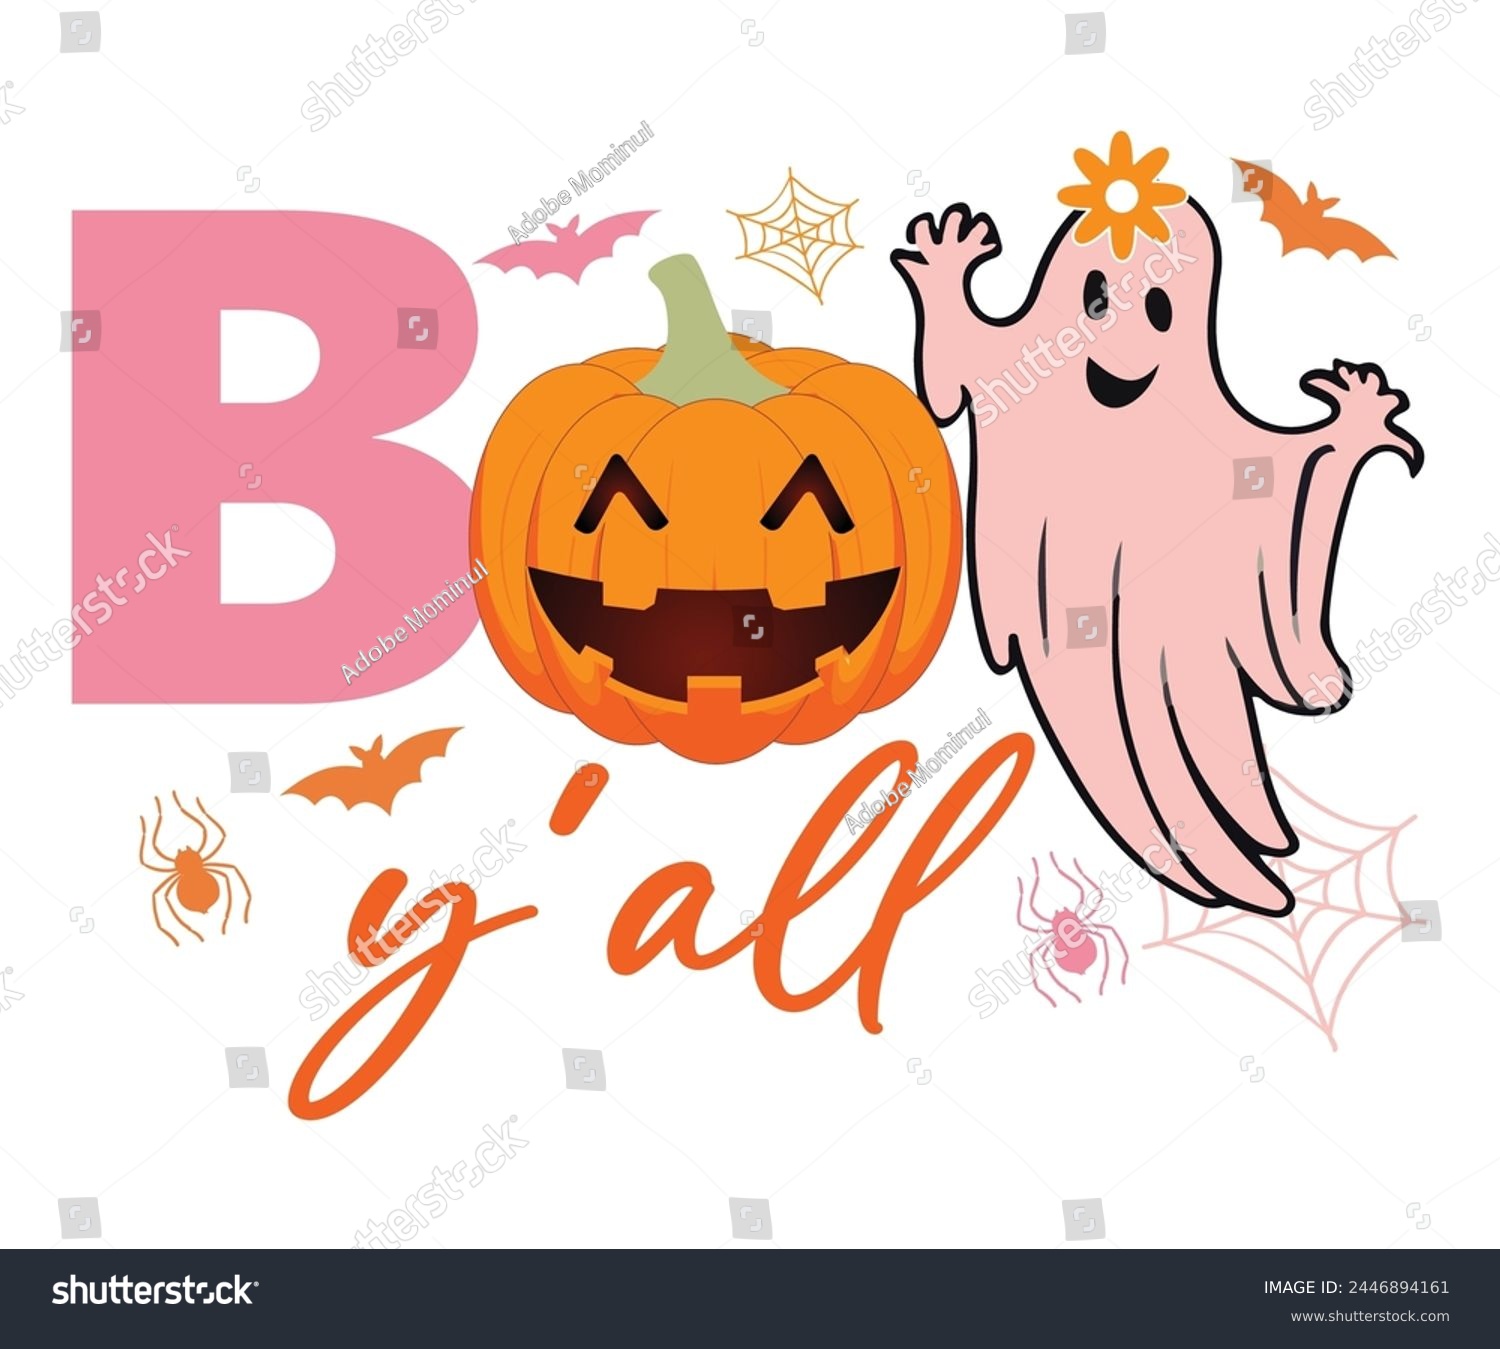 SVG of Boo Y'all Svg,Retro,Halloween Svg,Typography,Halloween Quotes,Witches Svg,Halloween Party,Halloween Costume,Halloween Gift,Funny Halloween,Spooky Svg,Funny T shirt,Ghost Svg,Cut file svg